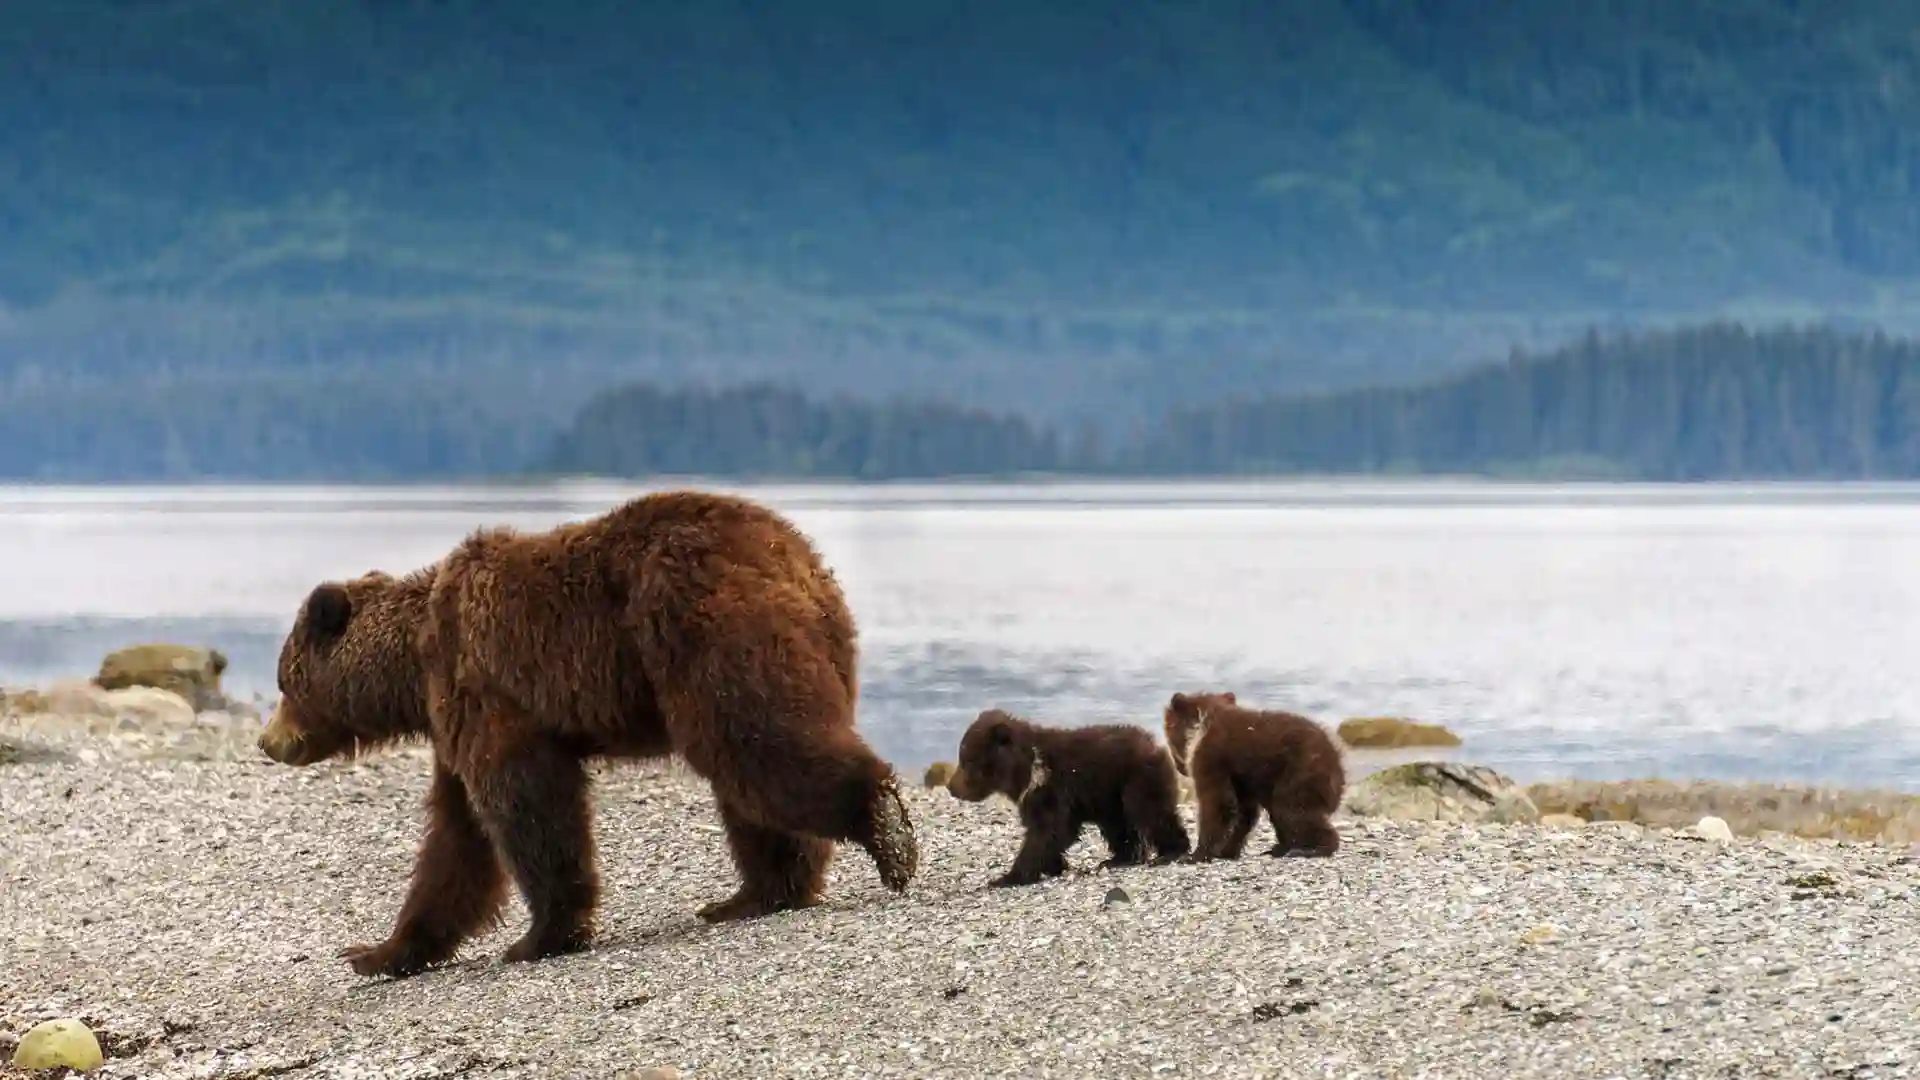 View of bears walking along shore in Canada, with water and lush forest in background.